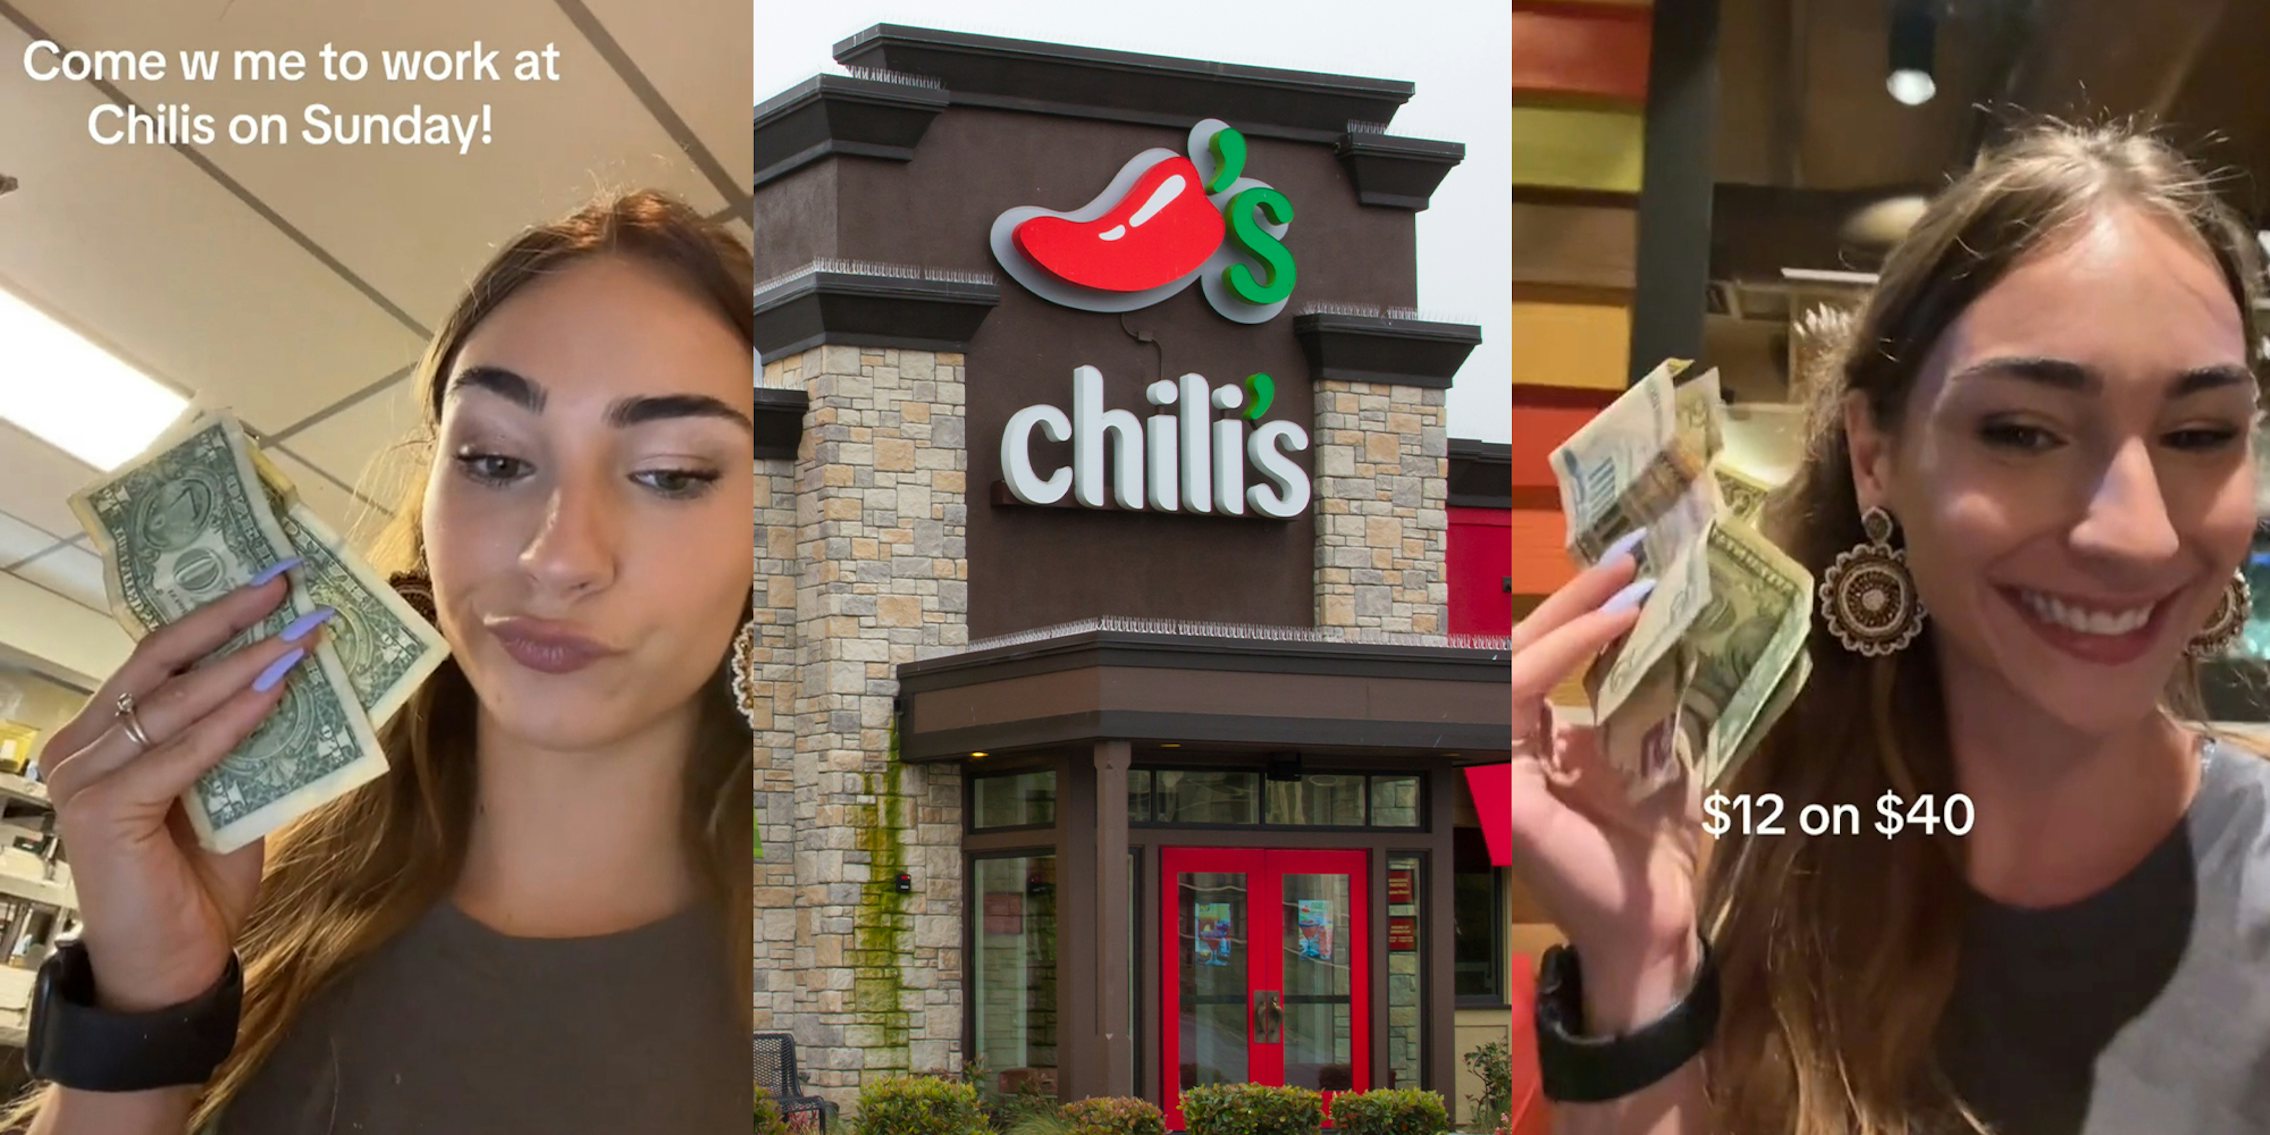 Chili's worker shares all the tips she makes in a day